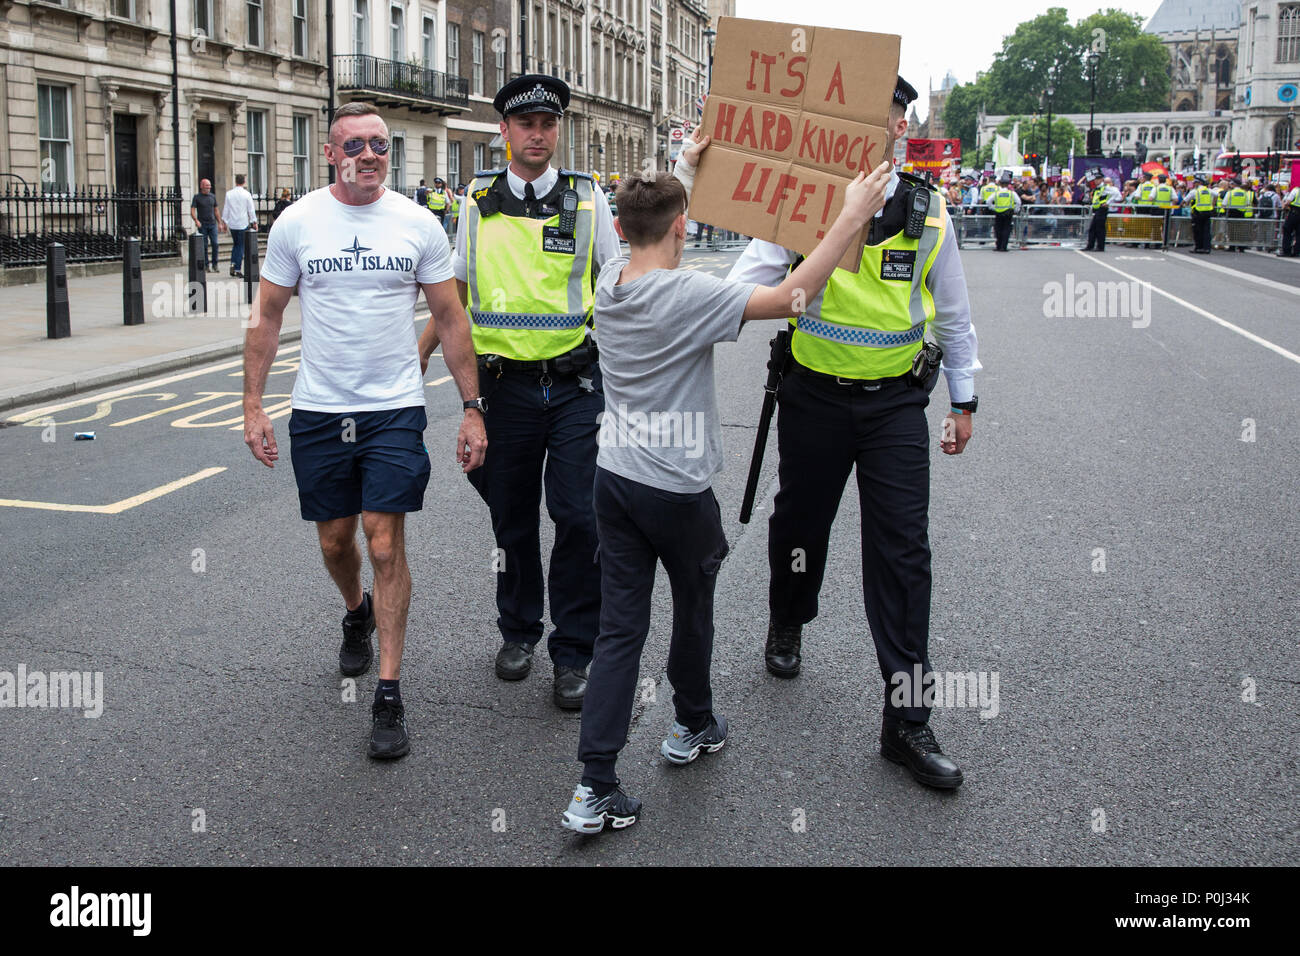 London, UK. 9th June, 2018. Supporters of Tommy Robinson, former leader of  the far-right English Defence League, challenge anti-fascists protesting  against the March for Tommy Robinson outside Downing Street. Tommy Robinson  was